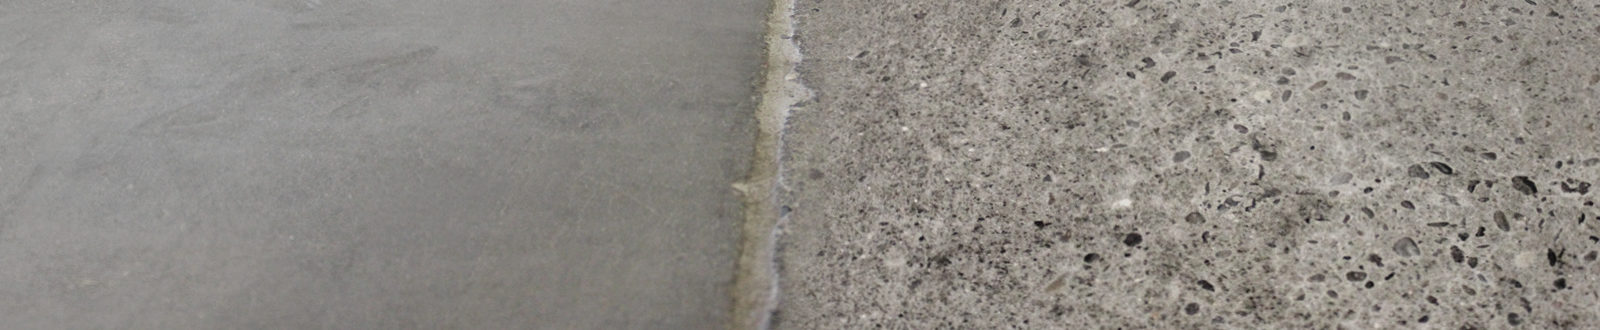 A comparison between concrete with and concrete without Hard-Cem shows that the concrete with Hard-Cem is smoother.